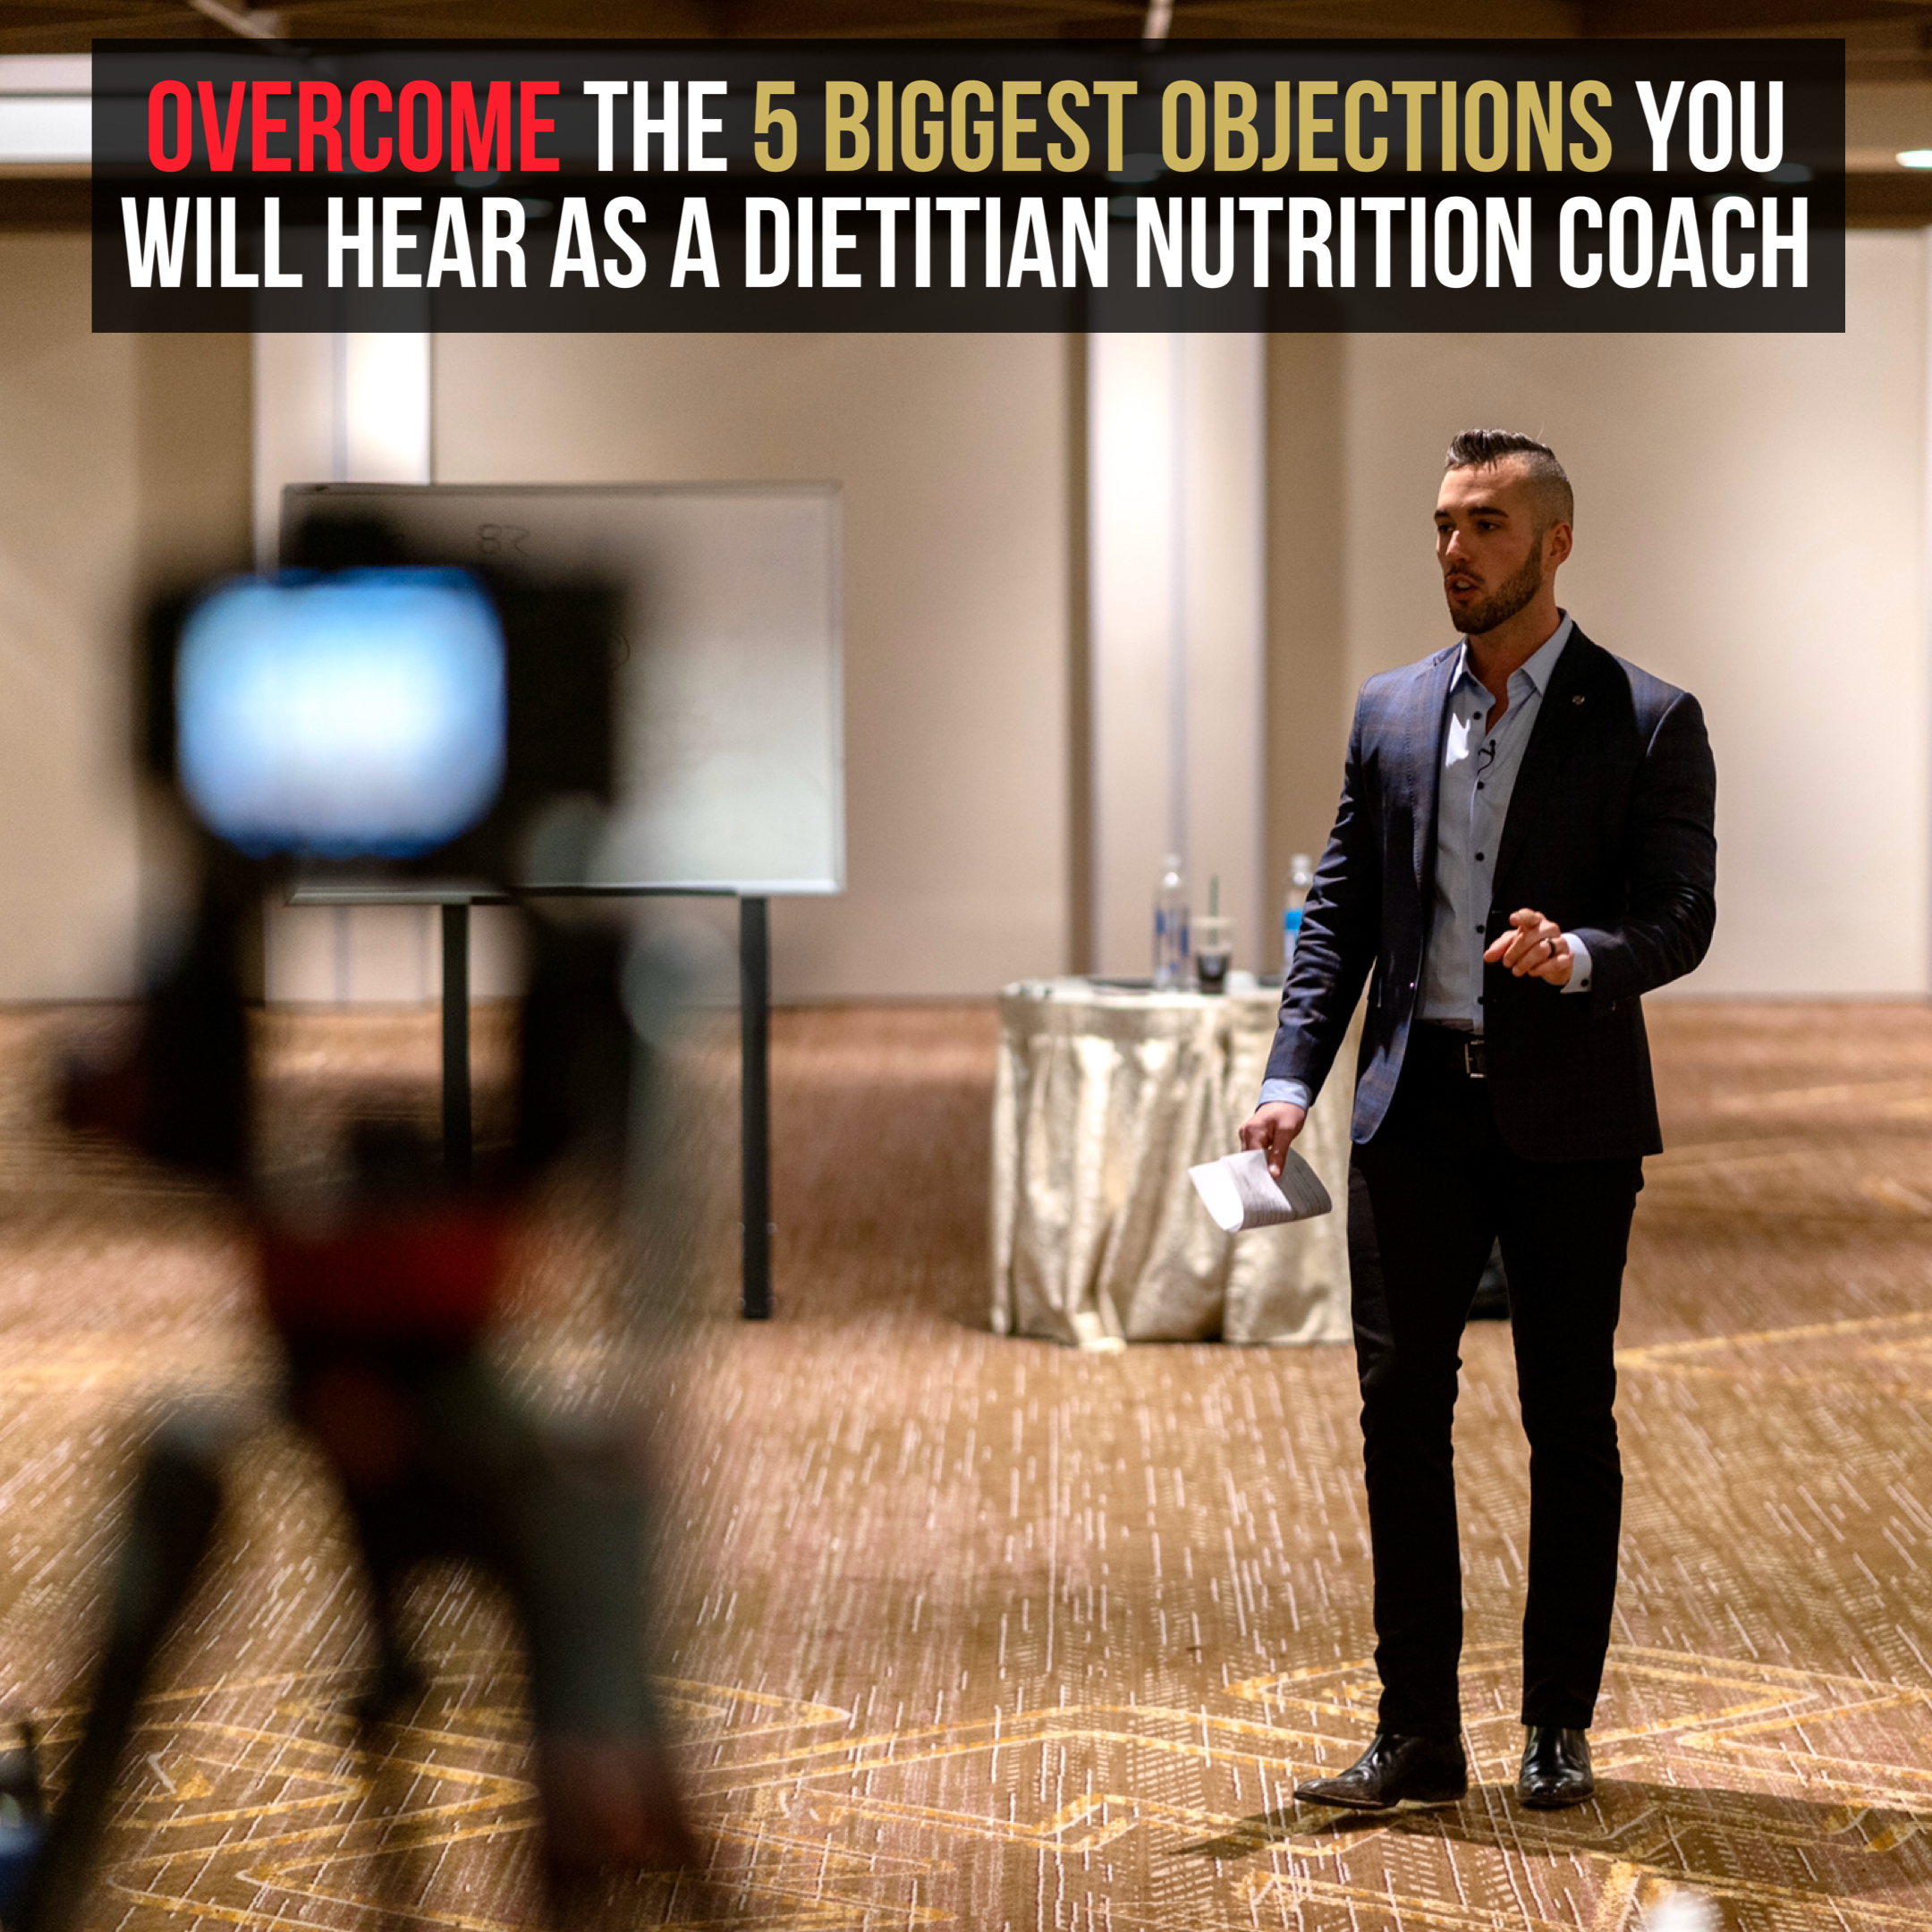 Dietitian Resources: How To Overcome The 5 Biggest Objections You Will Most Likely Hear In Your Nutrition Coaching Business